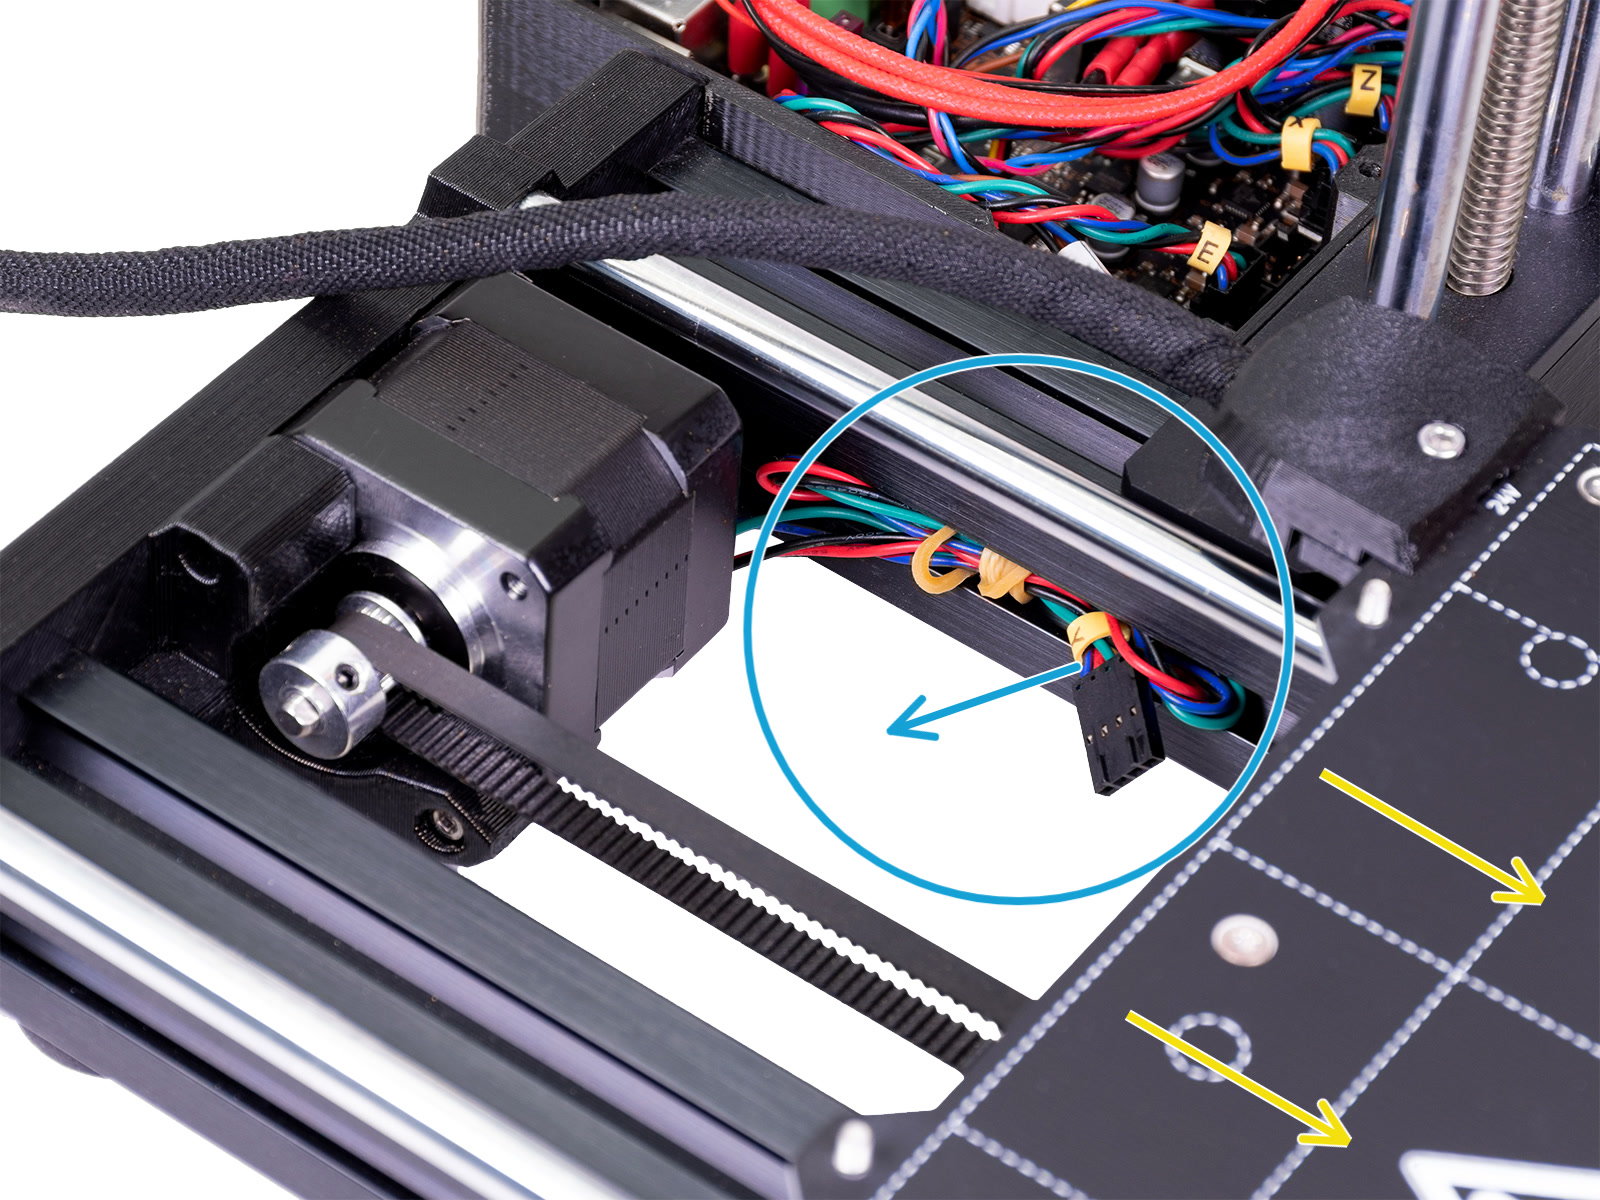 Connecting the Y-axis cables